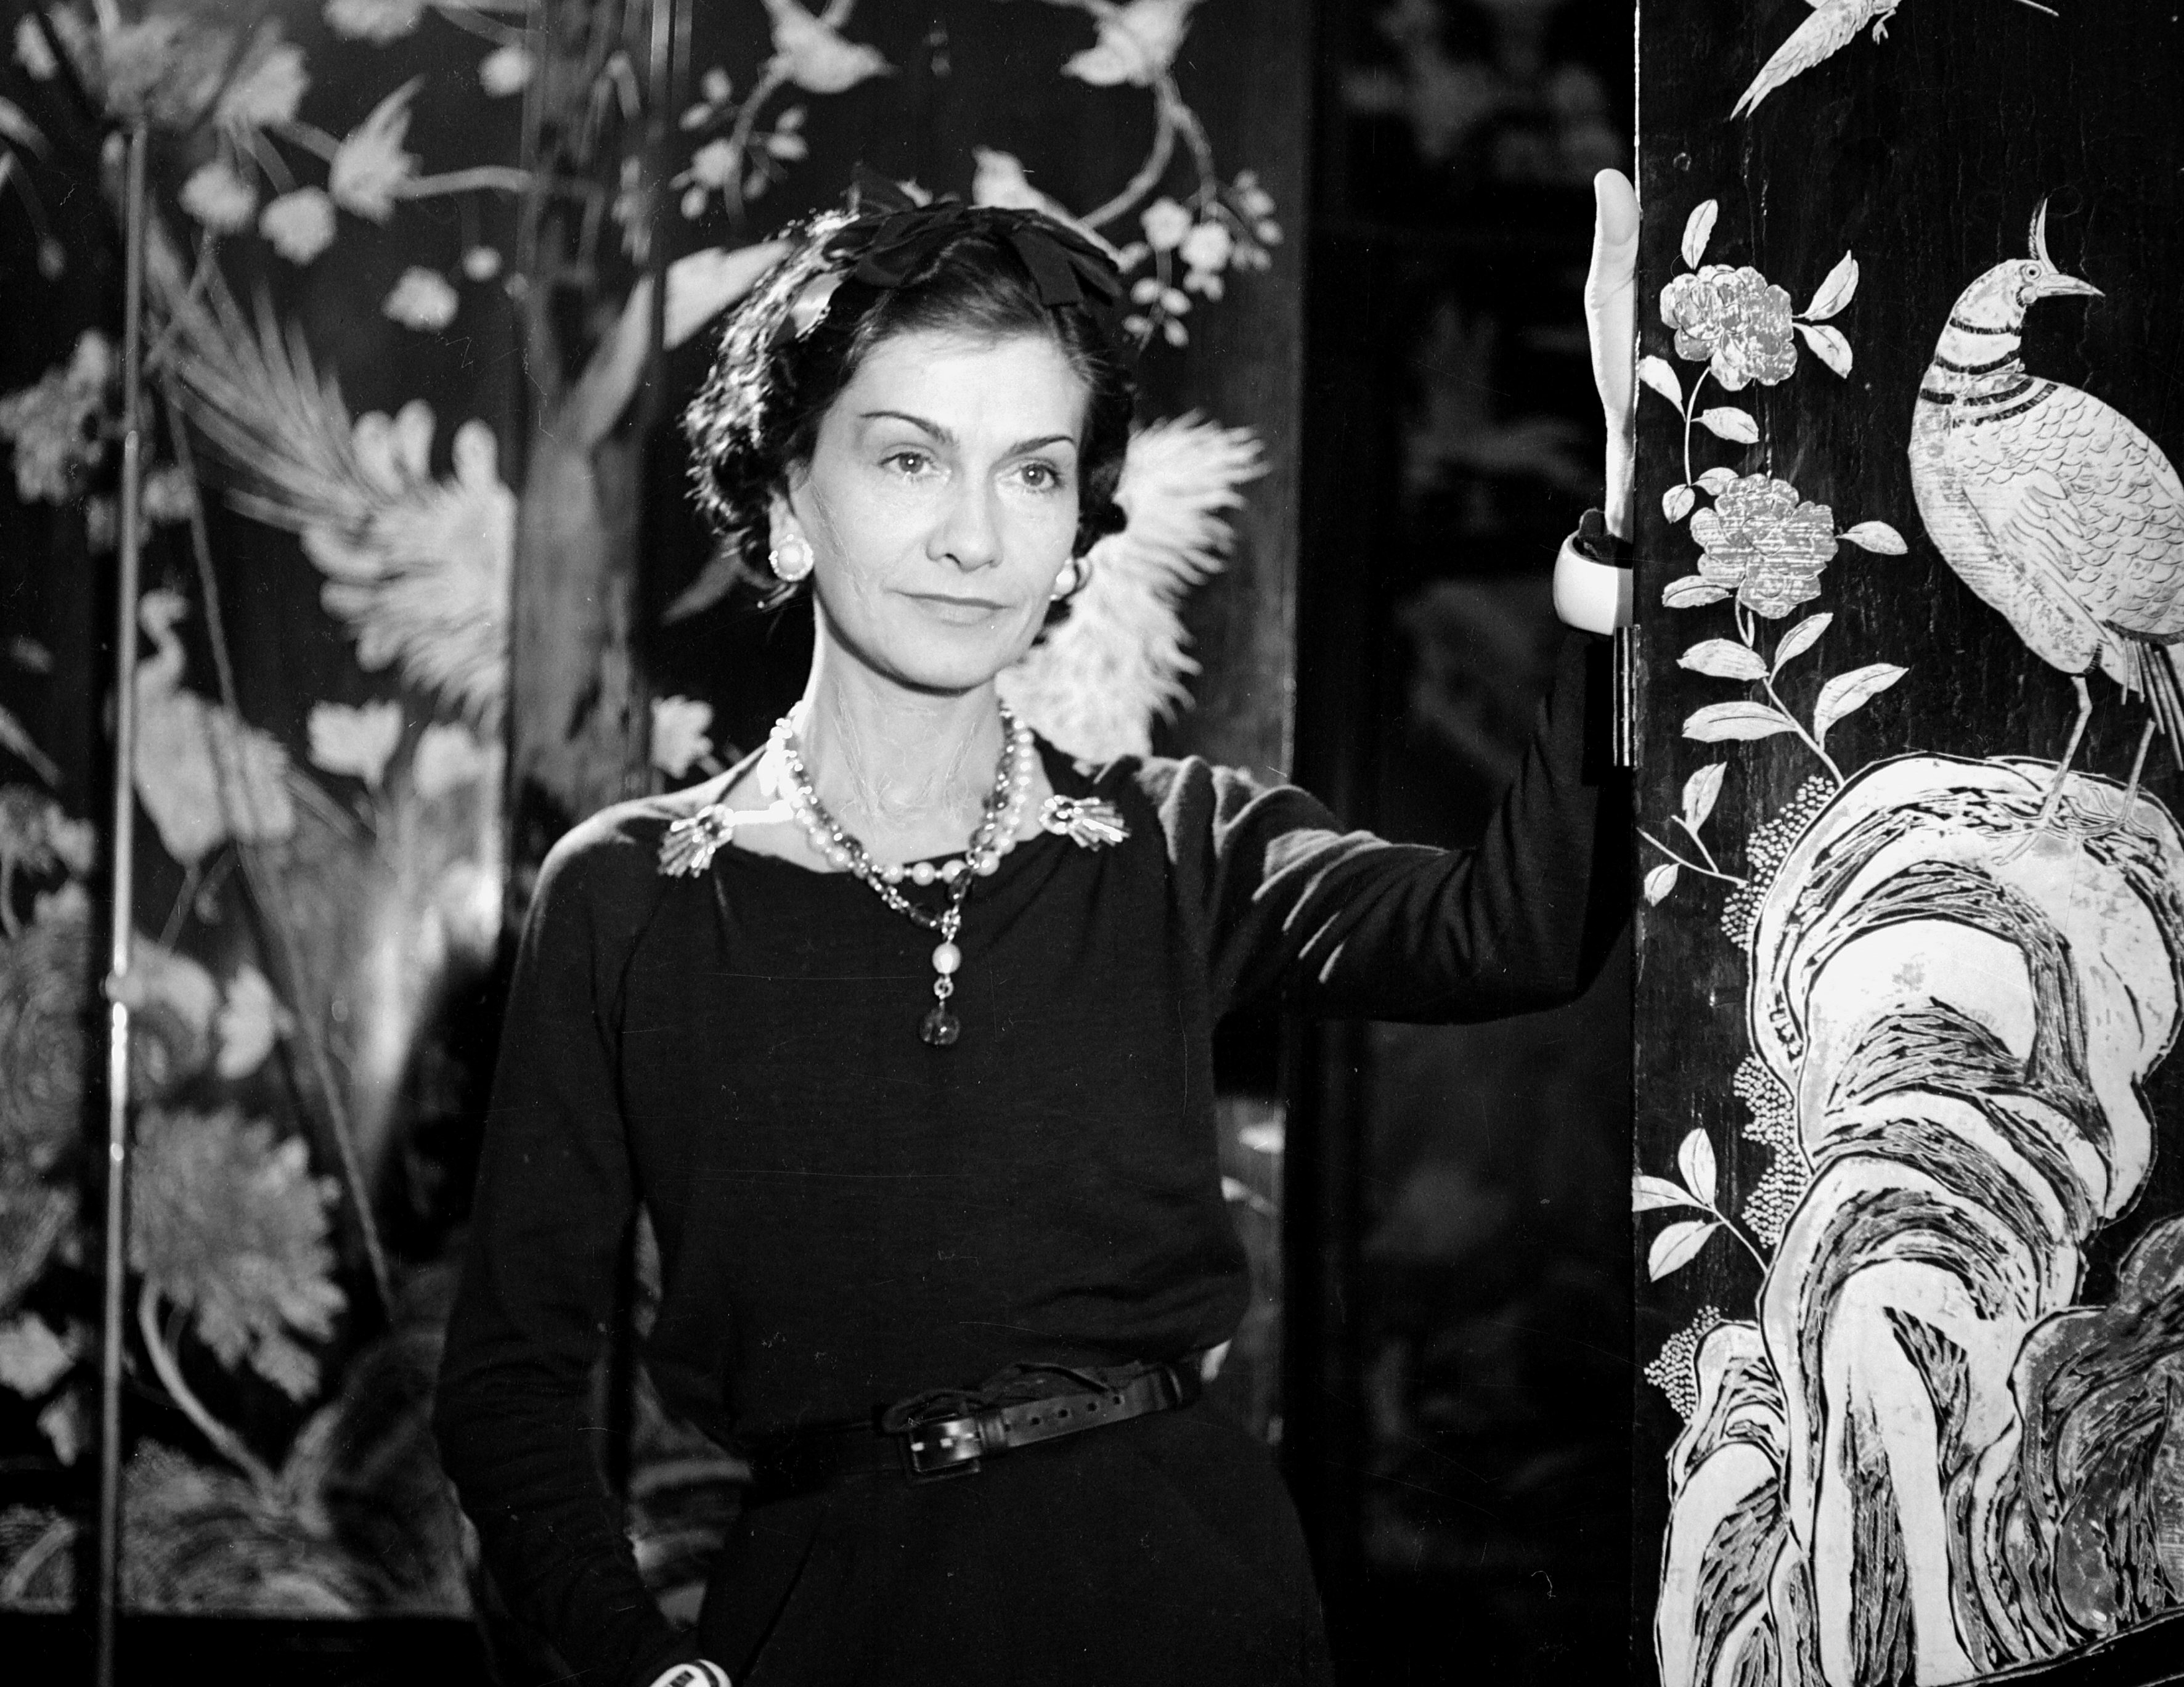 Coco Chanel's legacy: 'She embodied the brand and lifestyle. It's